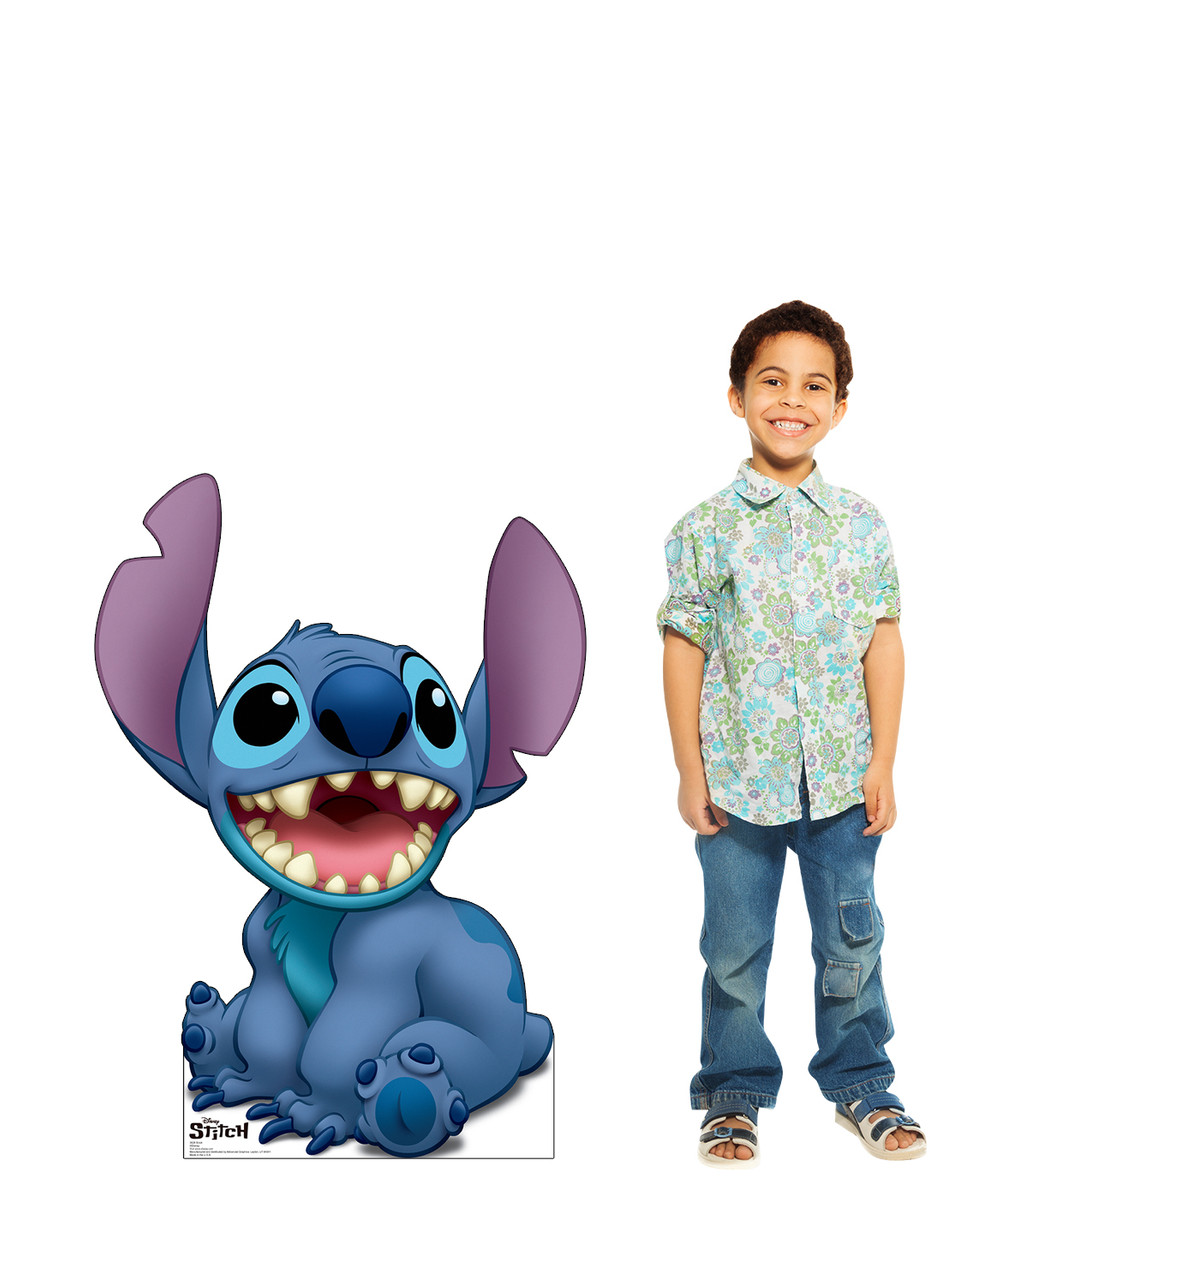 Life-size cardboard standee of Stitch from Disney + TV Series Stitch with model.